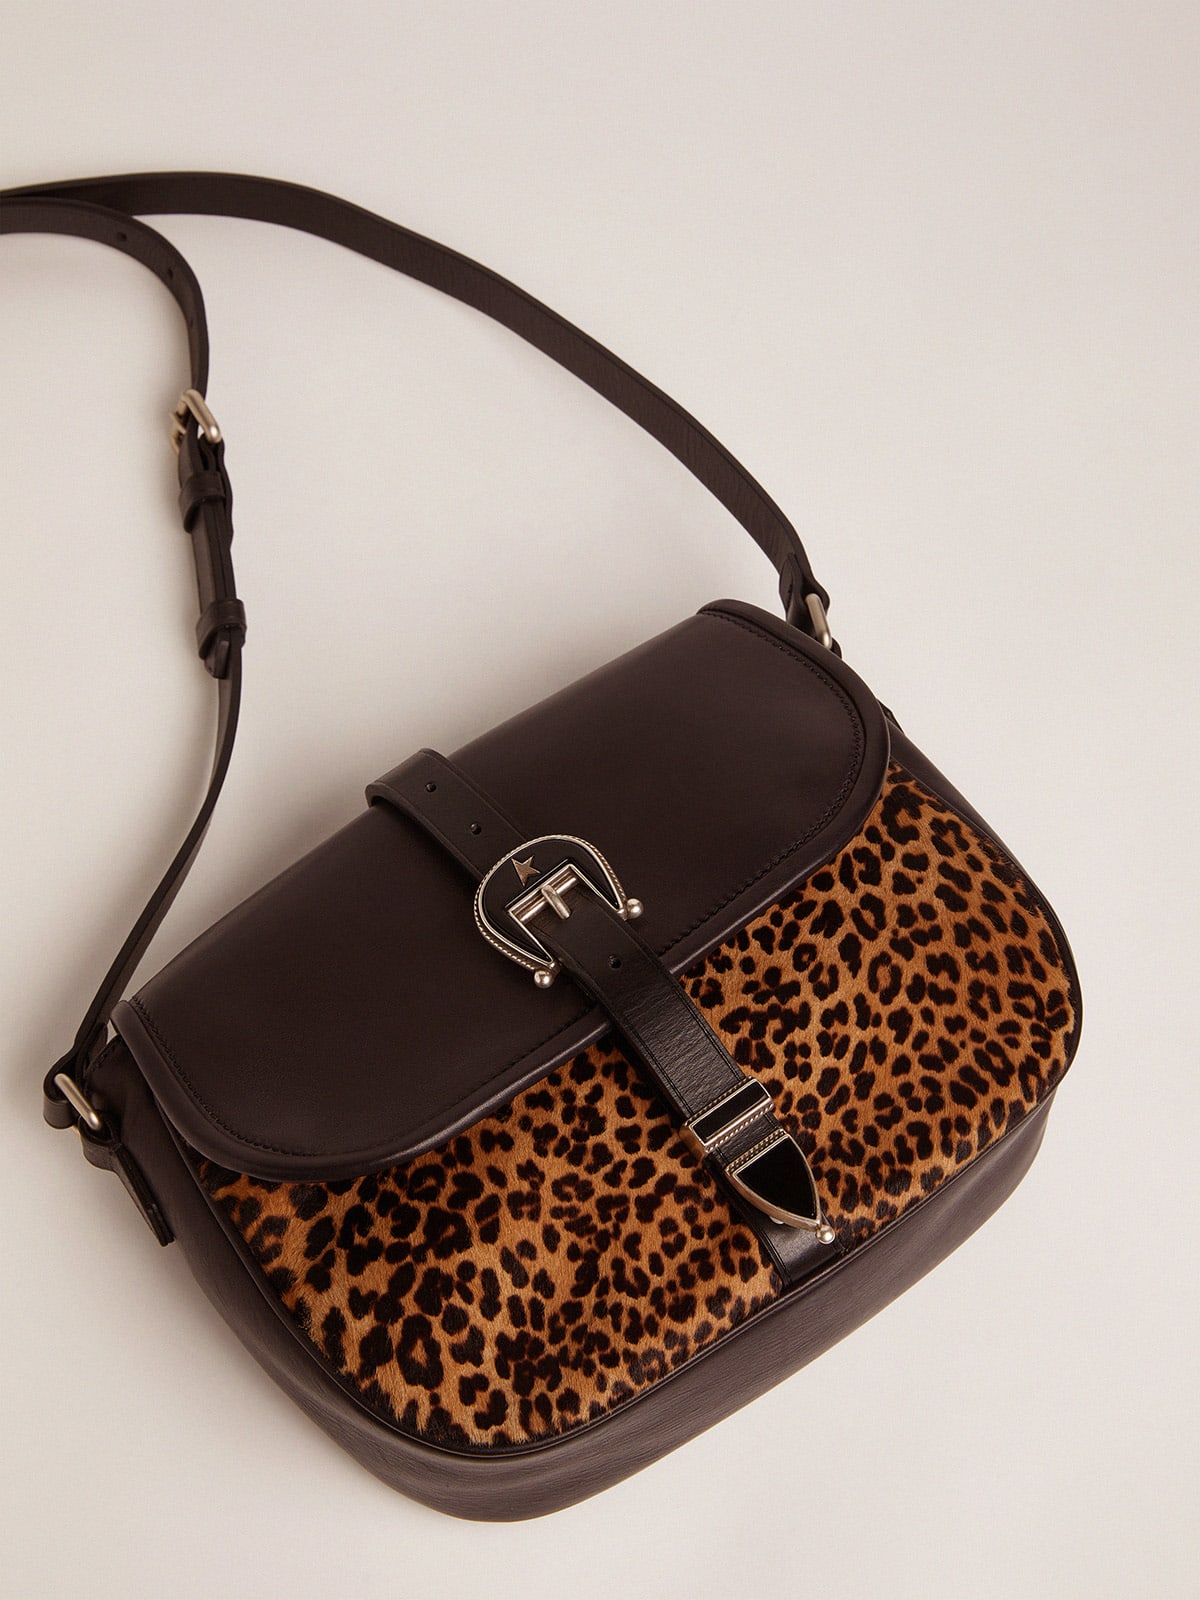 Golden Goose - Medium Rodeo Bag in black leather and leopard-print pony skin in 